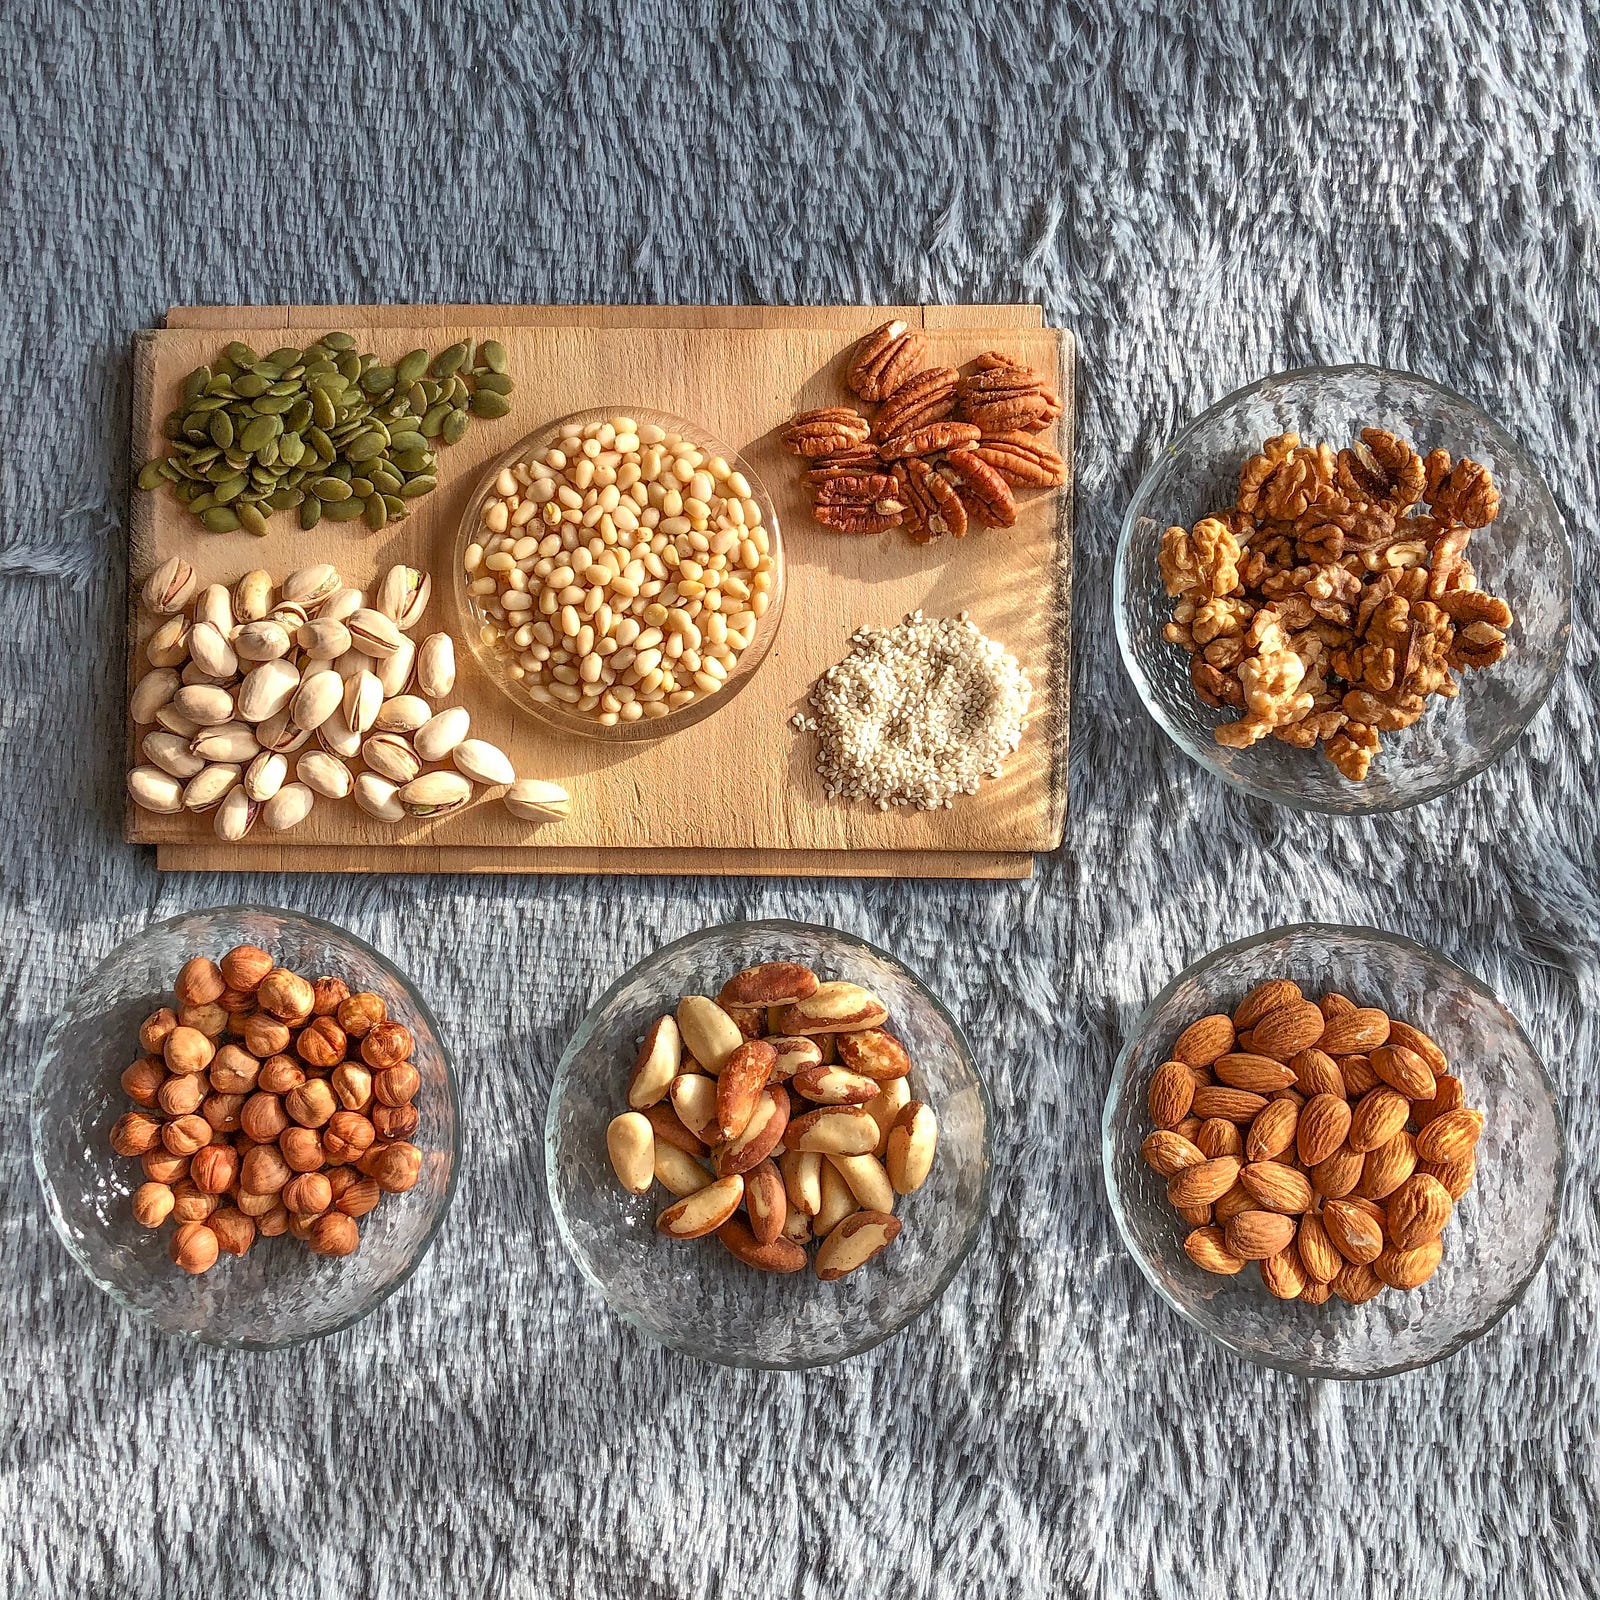 Various nuts sit in four small glass bowls. Theer is also a wood platter, in the upper left region, with more nuts. Addressing social and environmental factors is crucial in the fight against obesity.